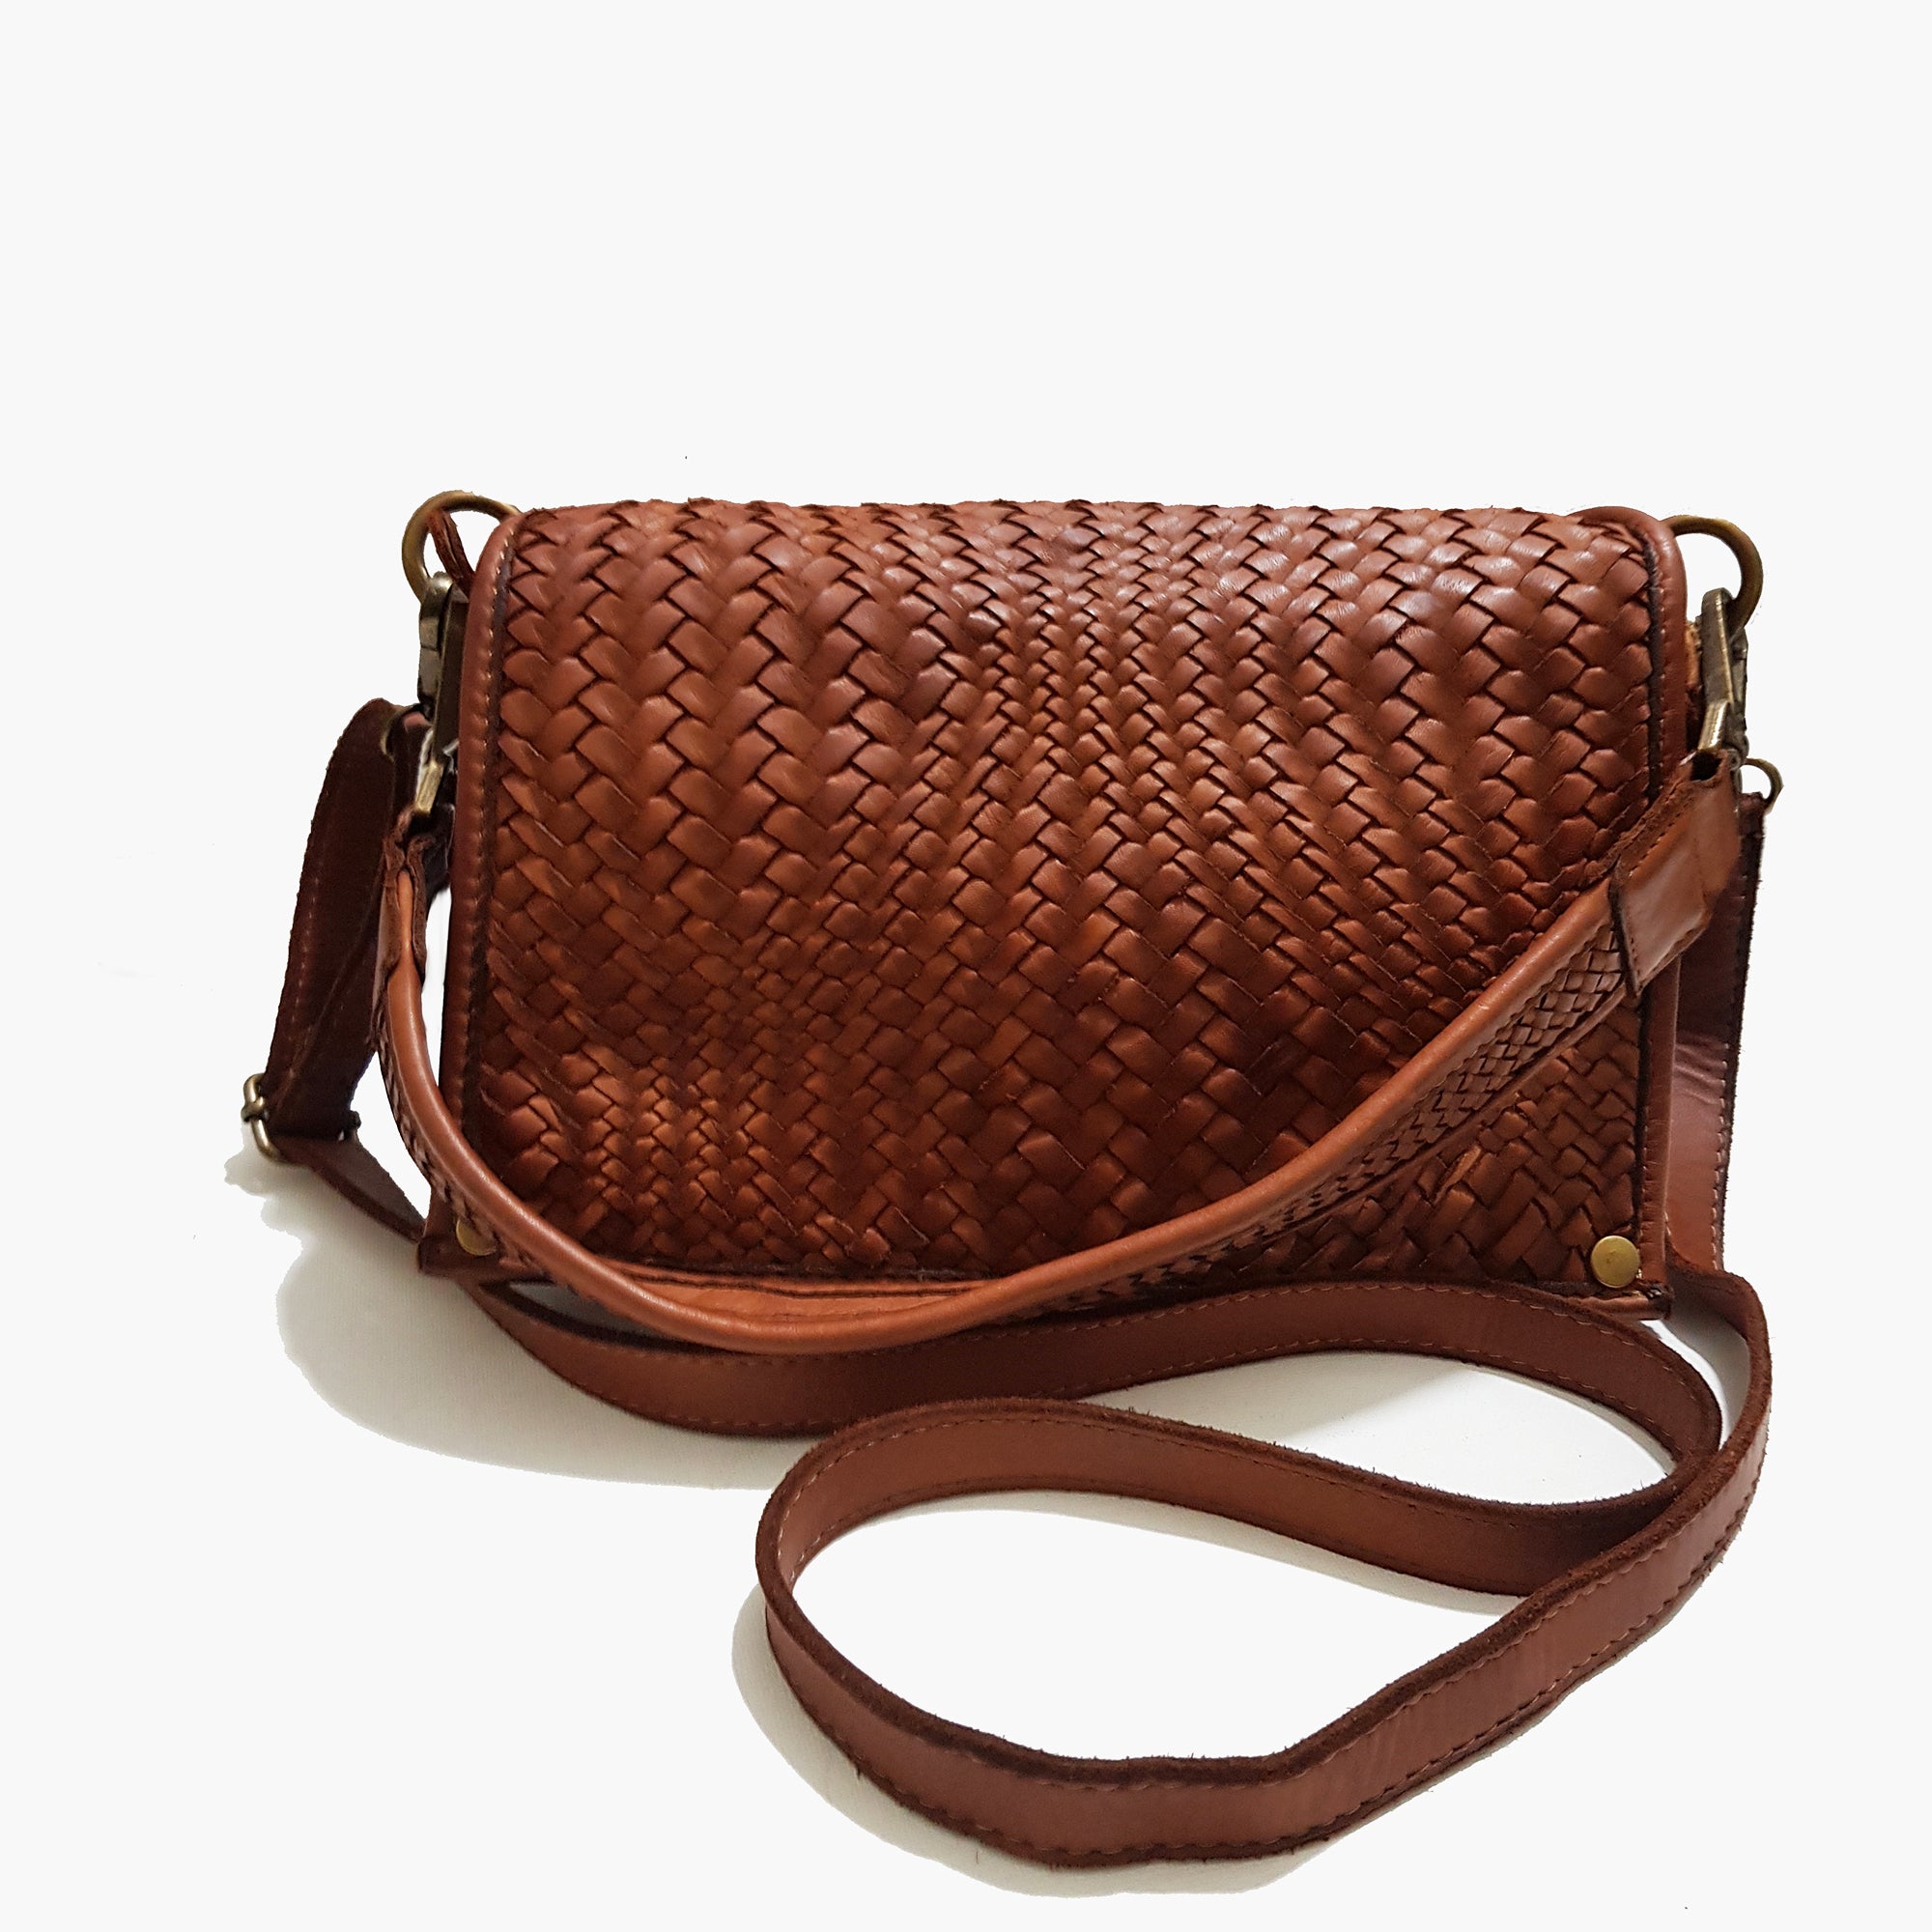 Woven Leather Small Crossbody with Woven Handle